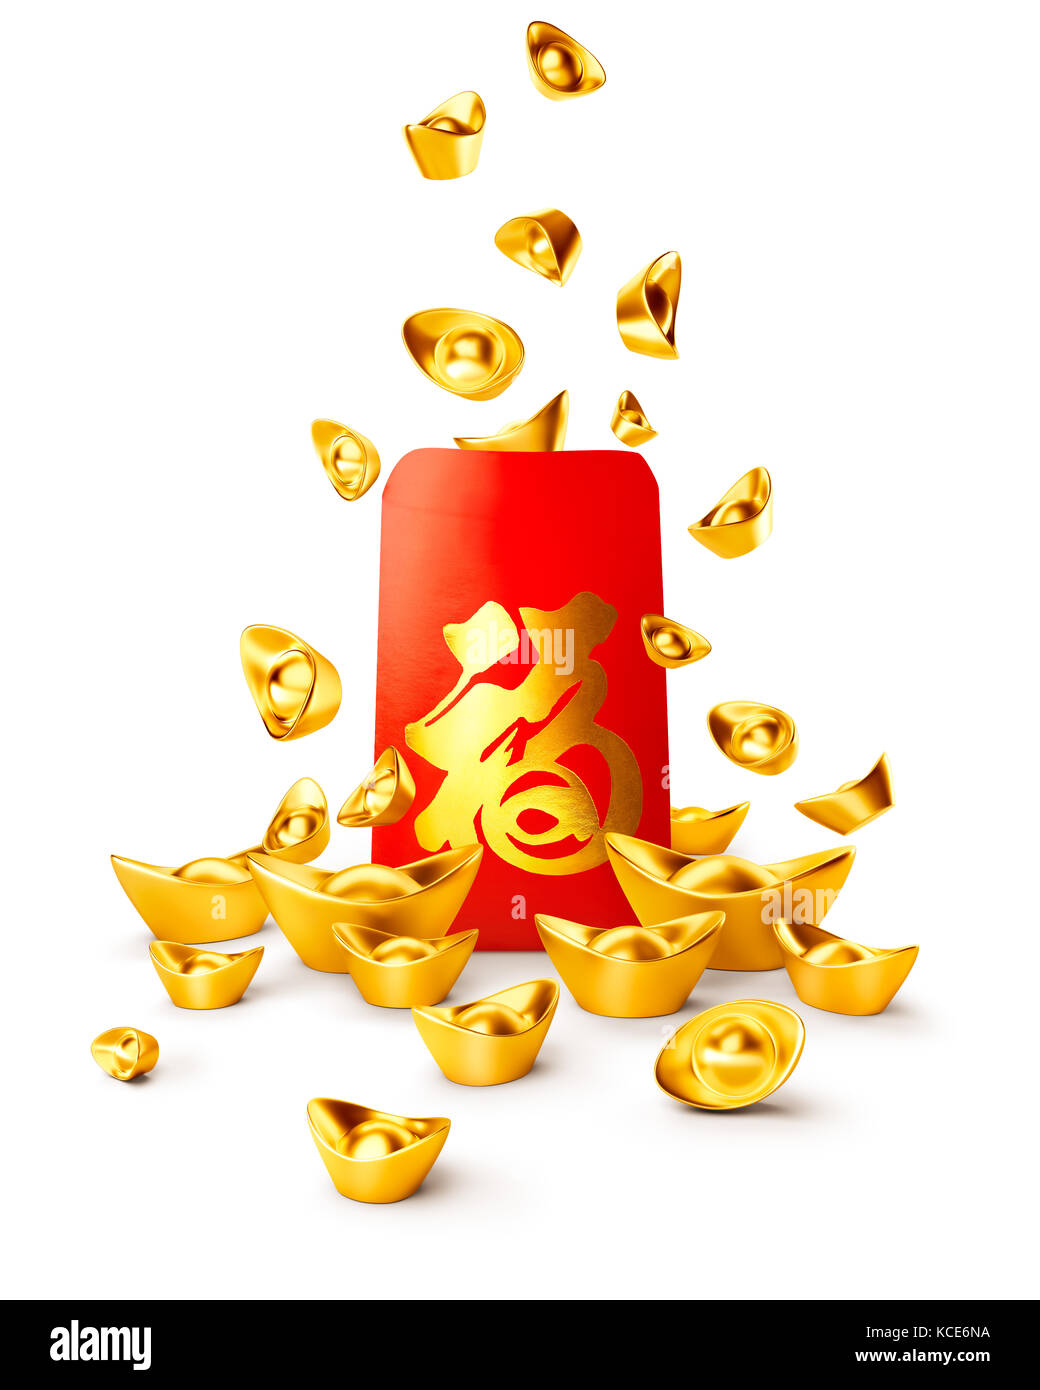 Red packet and chinese gold sycee ( yuanbao ) isolated on white, Chinese calligraphy 'FU' (Foreign text means Prosperity) Stock Photo